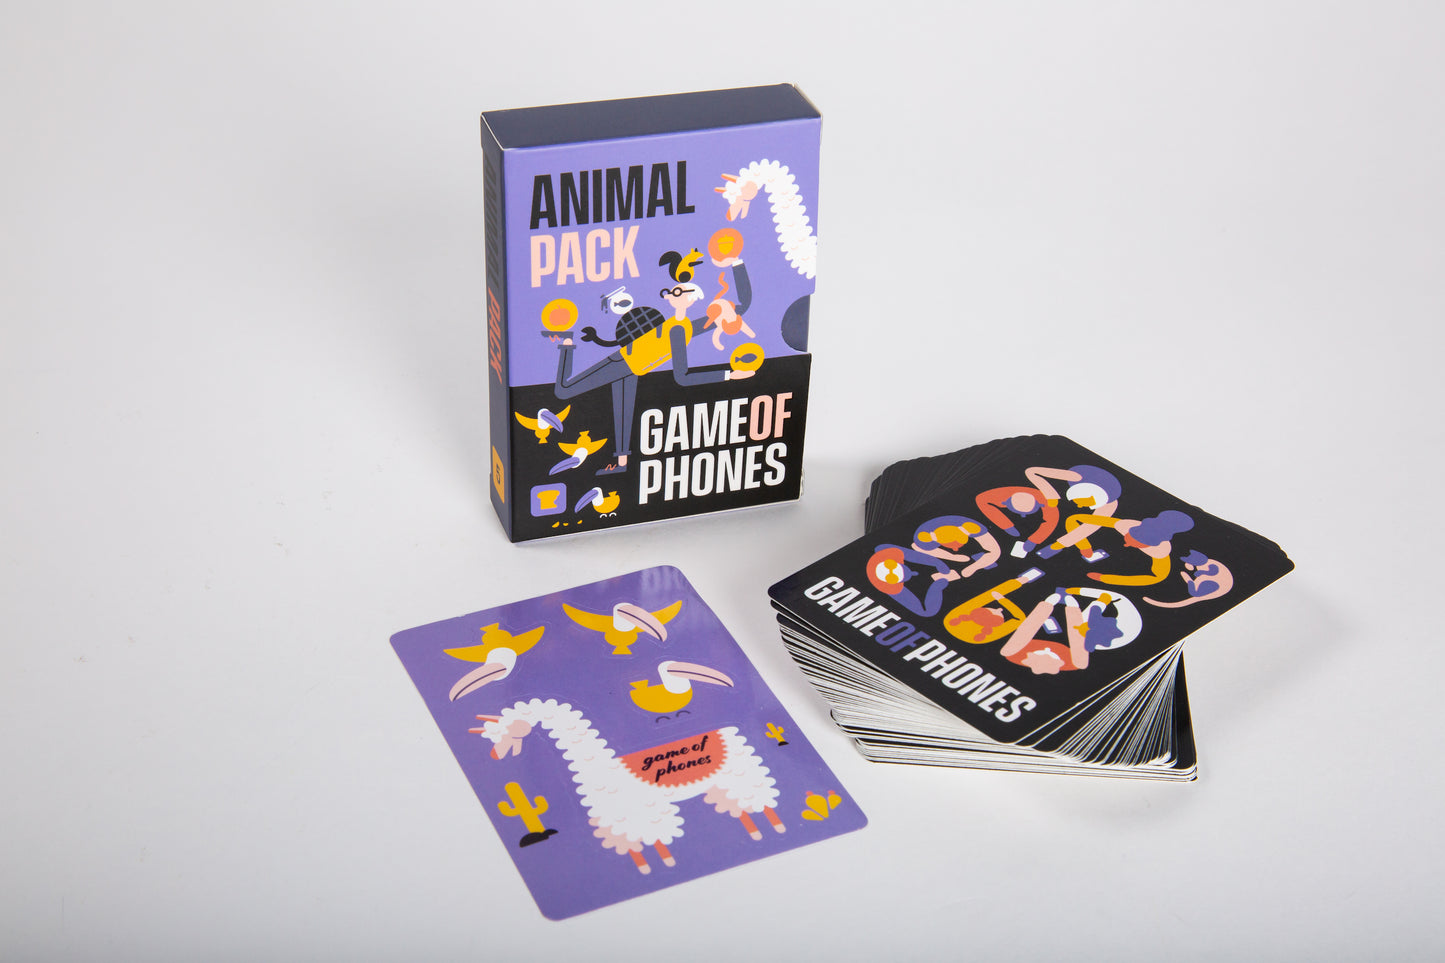 Game of Phones: The Animal Mini Pack